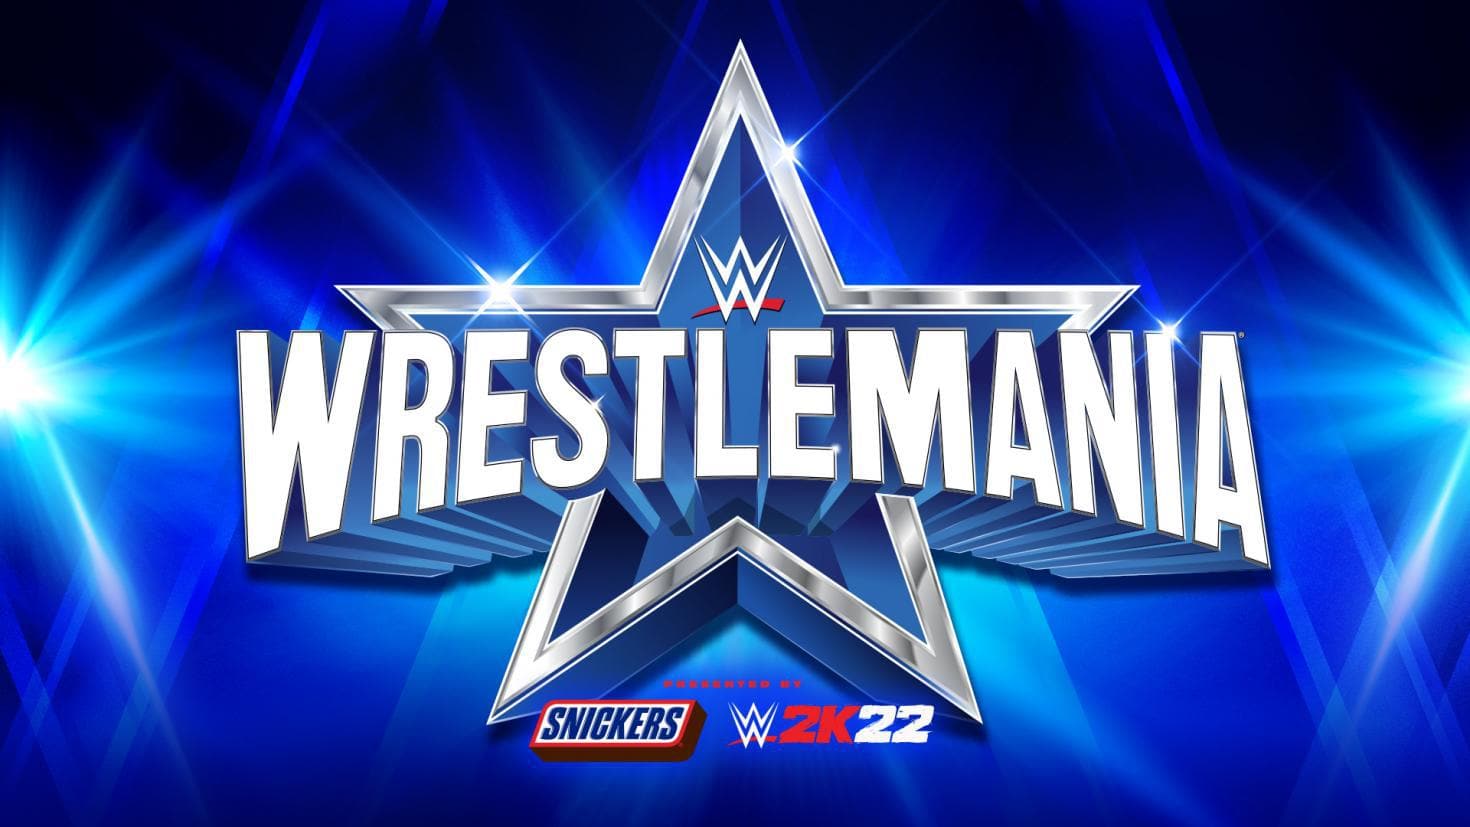 WWE Wrestlemania 38: Is WWE planning to change the name of the two nights of Wrestlemania 38? Check here